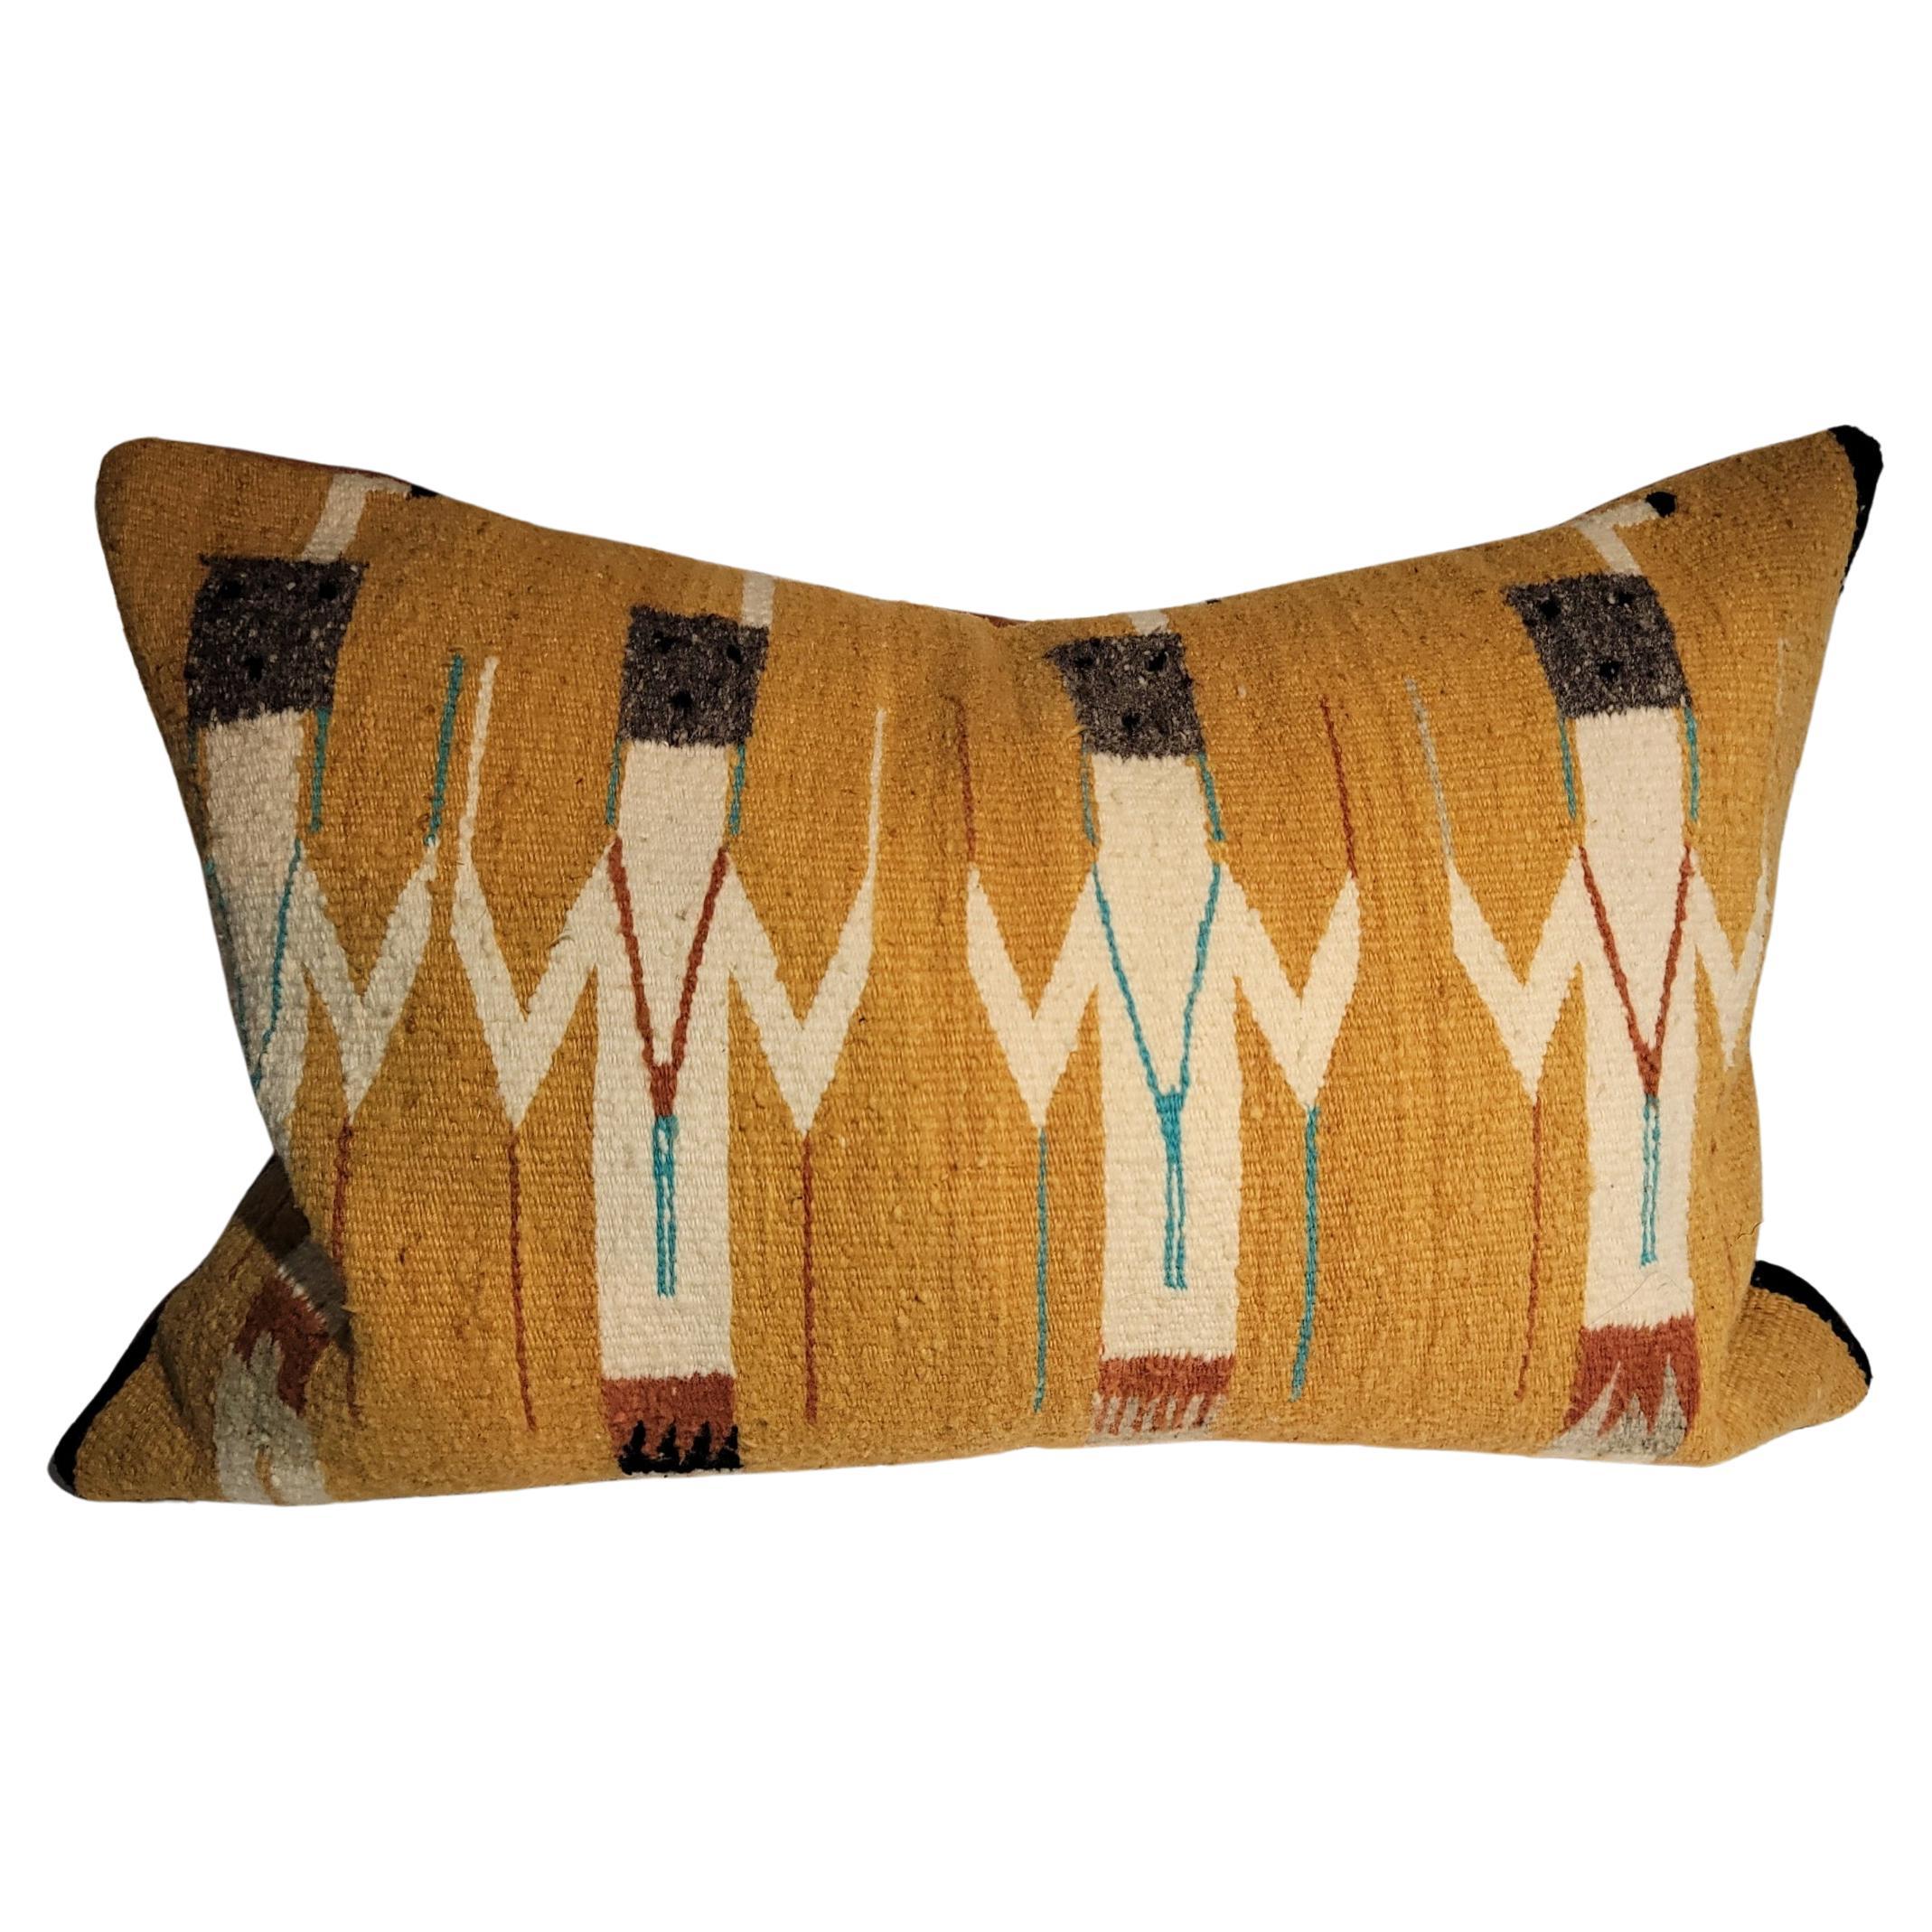 Yei Indian Weaving Pillow W/ Leather Back For Sale